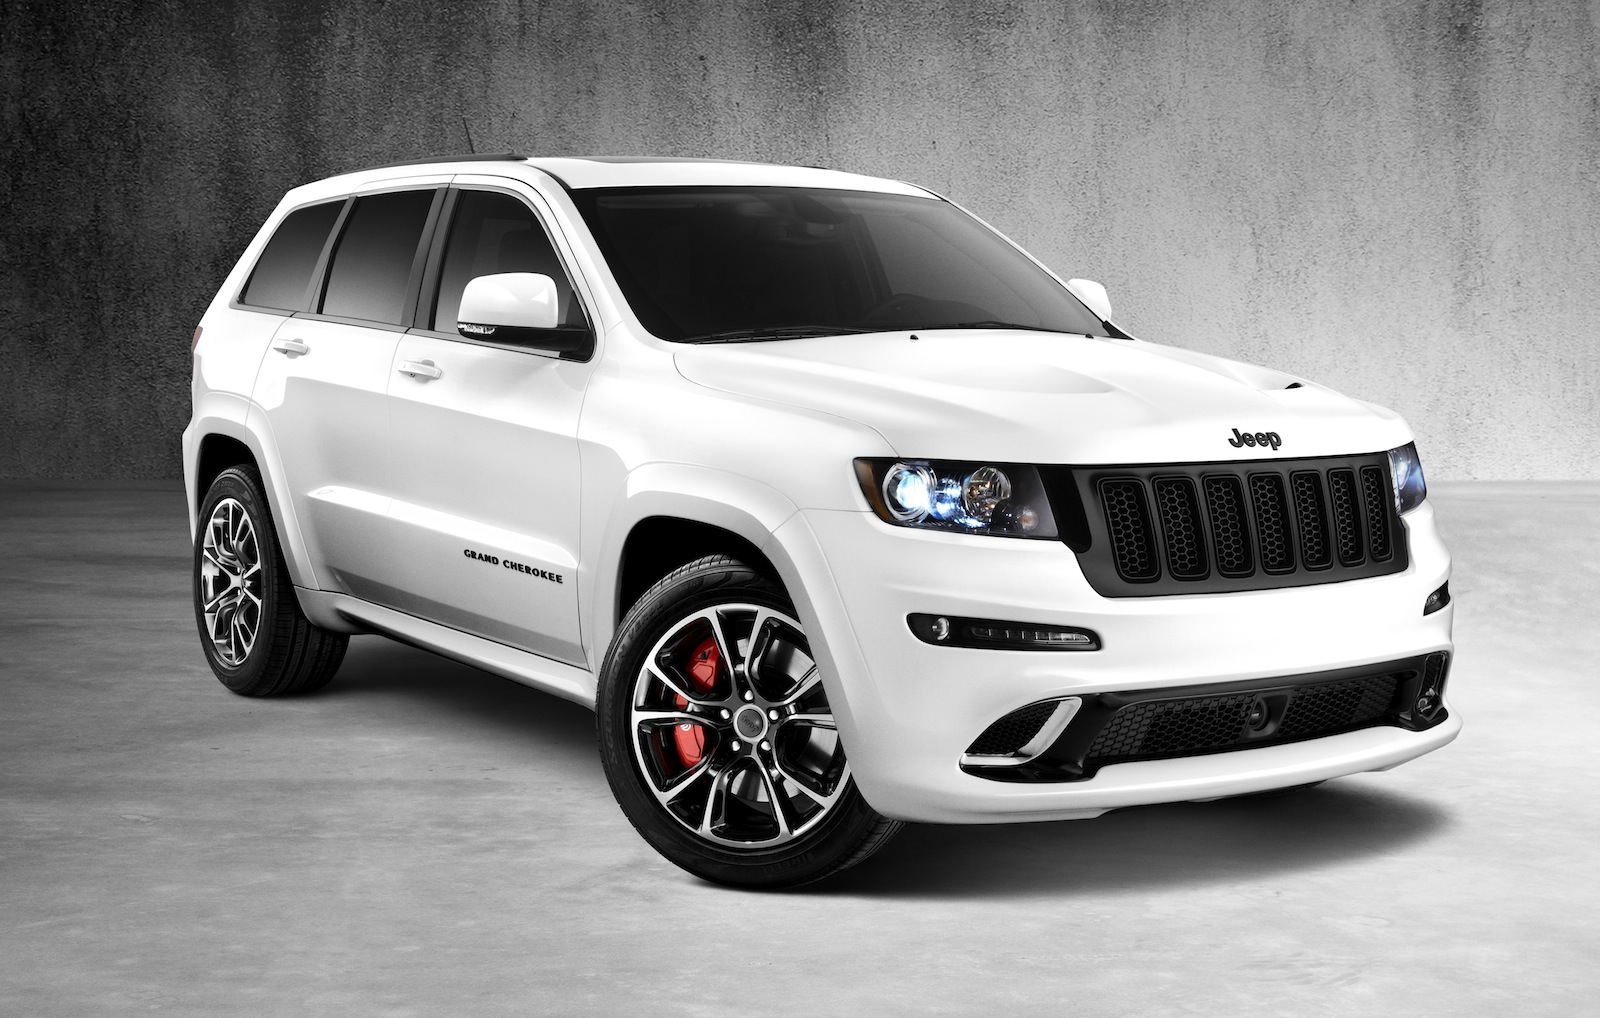 2010 Jeep Grand Cherokee SRT8 Review, Trims, Specs, Price, New Interior Features, Exterior